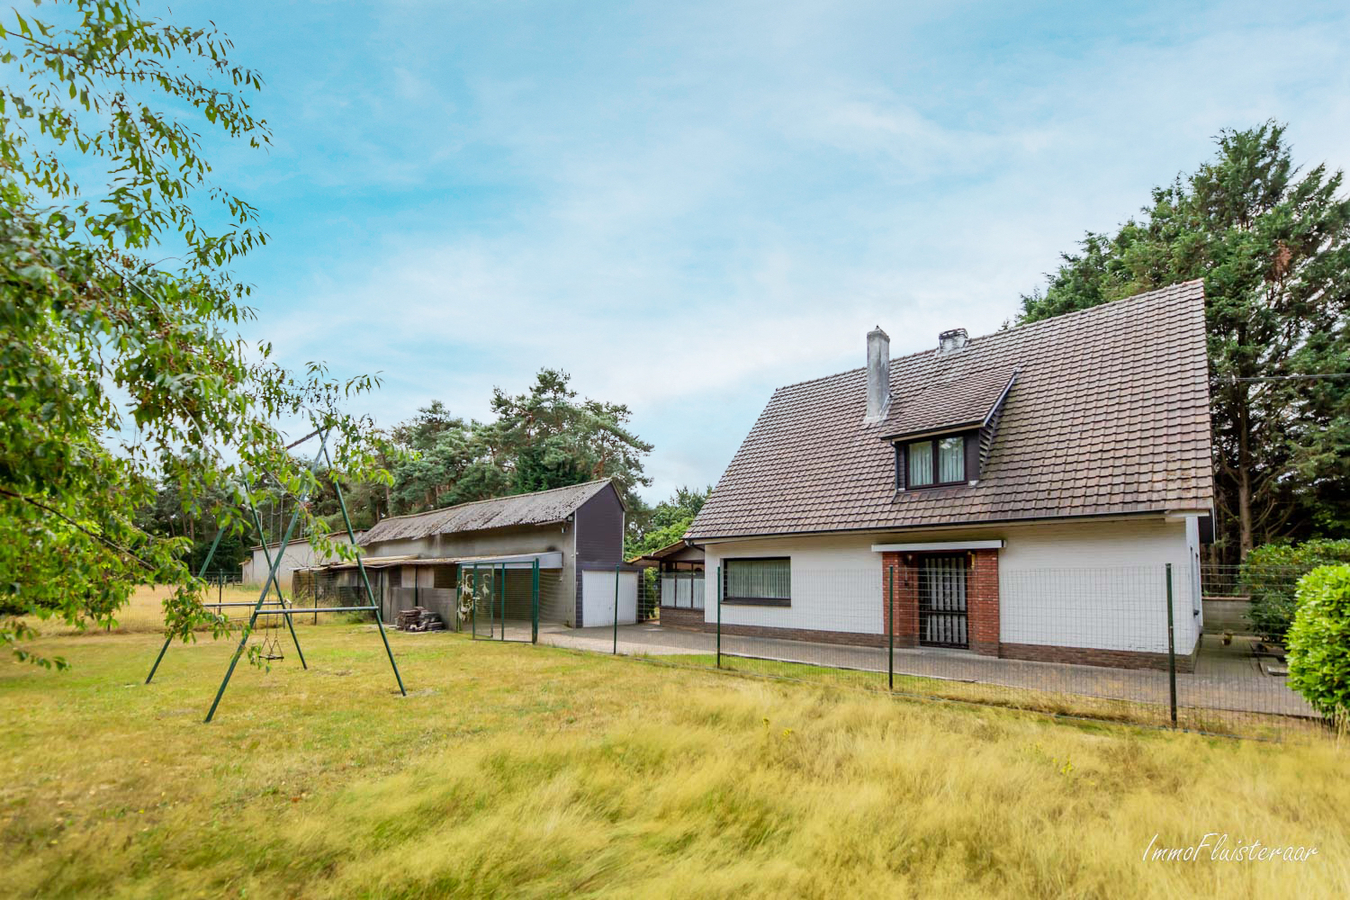 Property for sale in Herentals